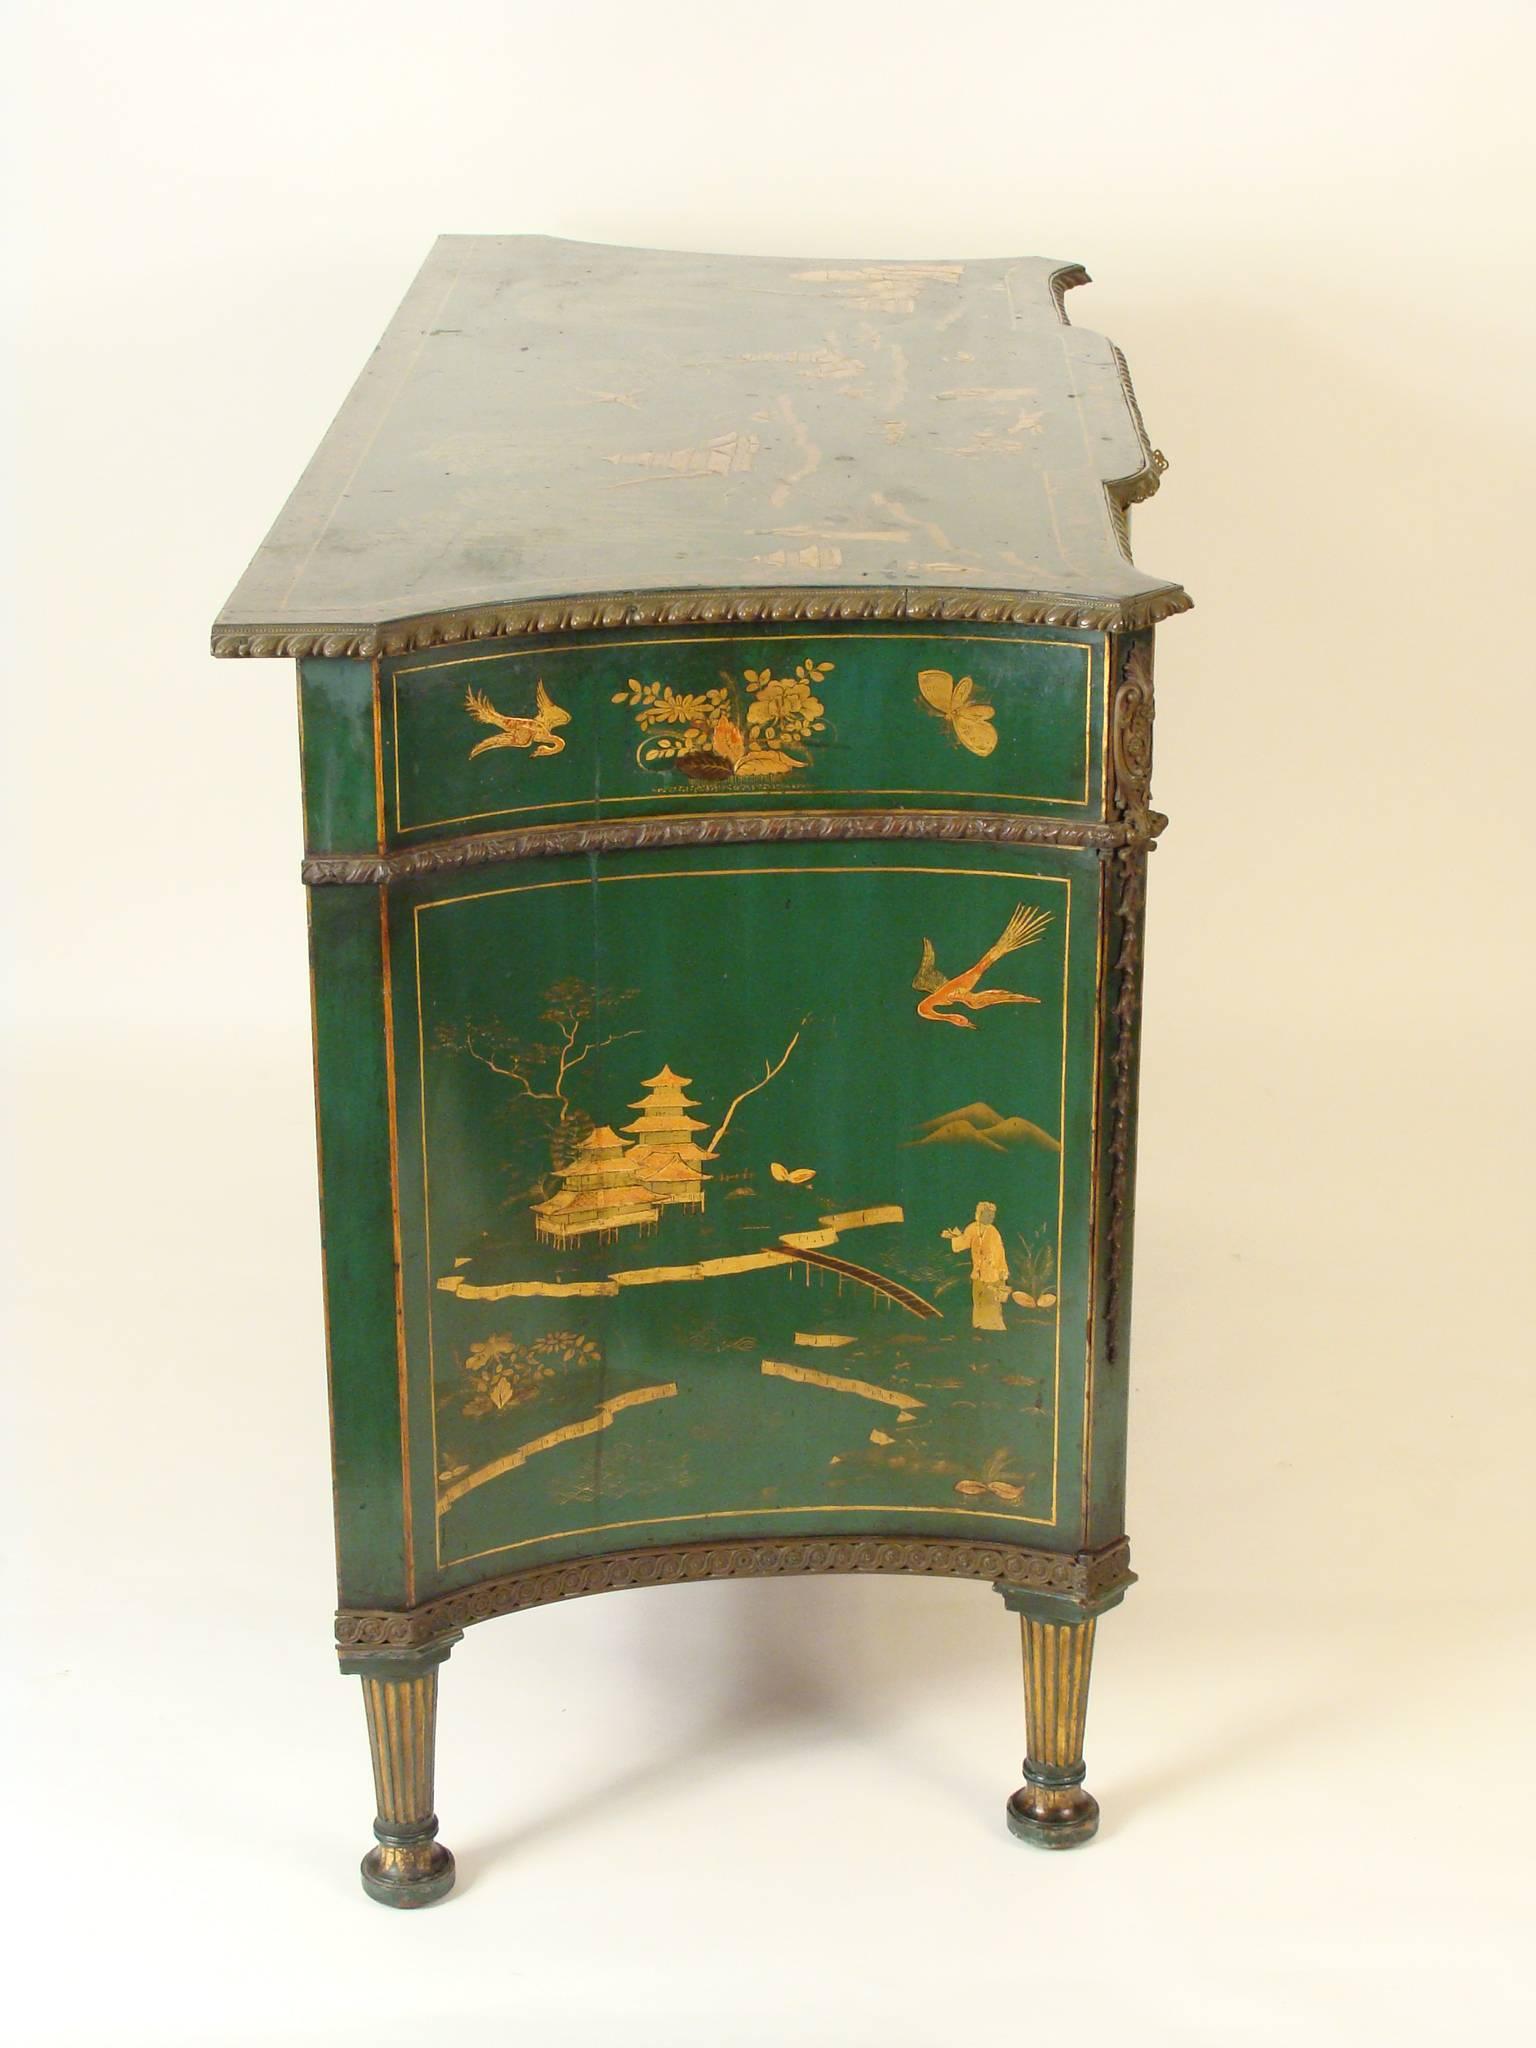 Green chinoiserie decorated bronze-mounted Chippendale style cabinet, circa 1880. This cabinet has raised chinoiserie decorations and bronze mounts. The original of this cabinet was made by Thomas Chippendale for Nostell Priory in 1771. See the book